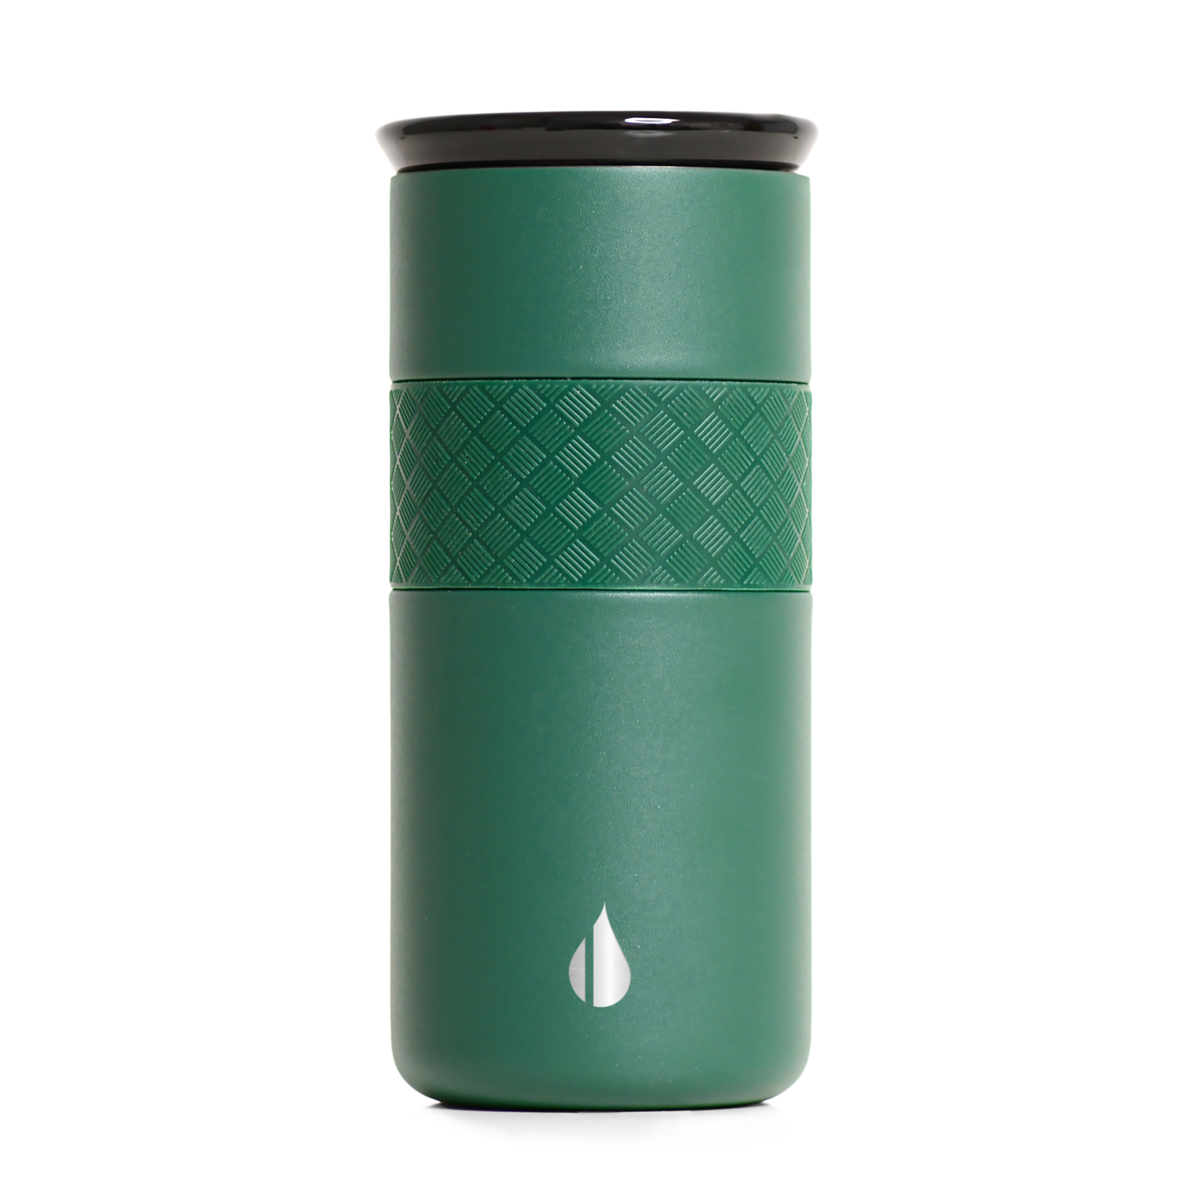 Elemental® 16 oz Artisan Stainless Steel Tumbler with Ceramic Lid in forest green